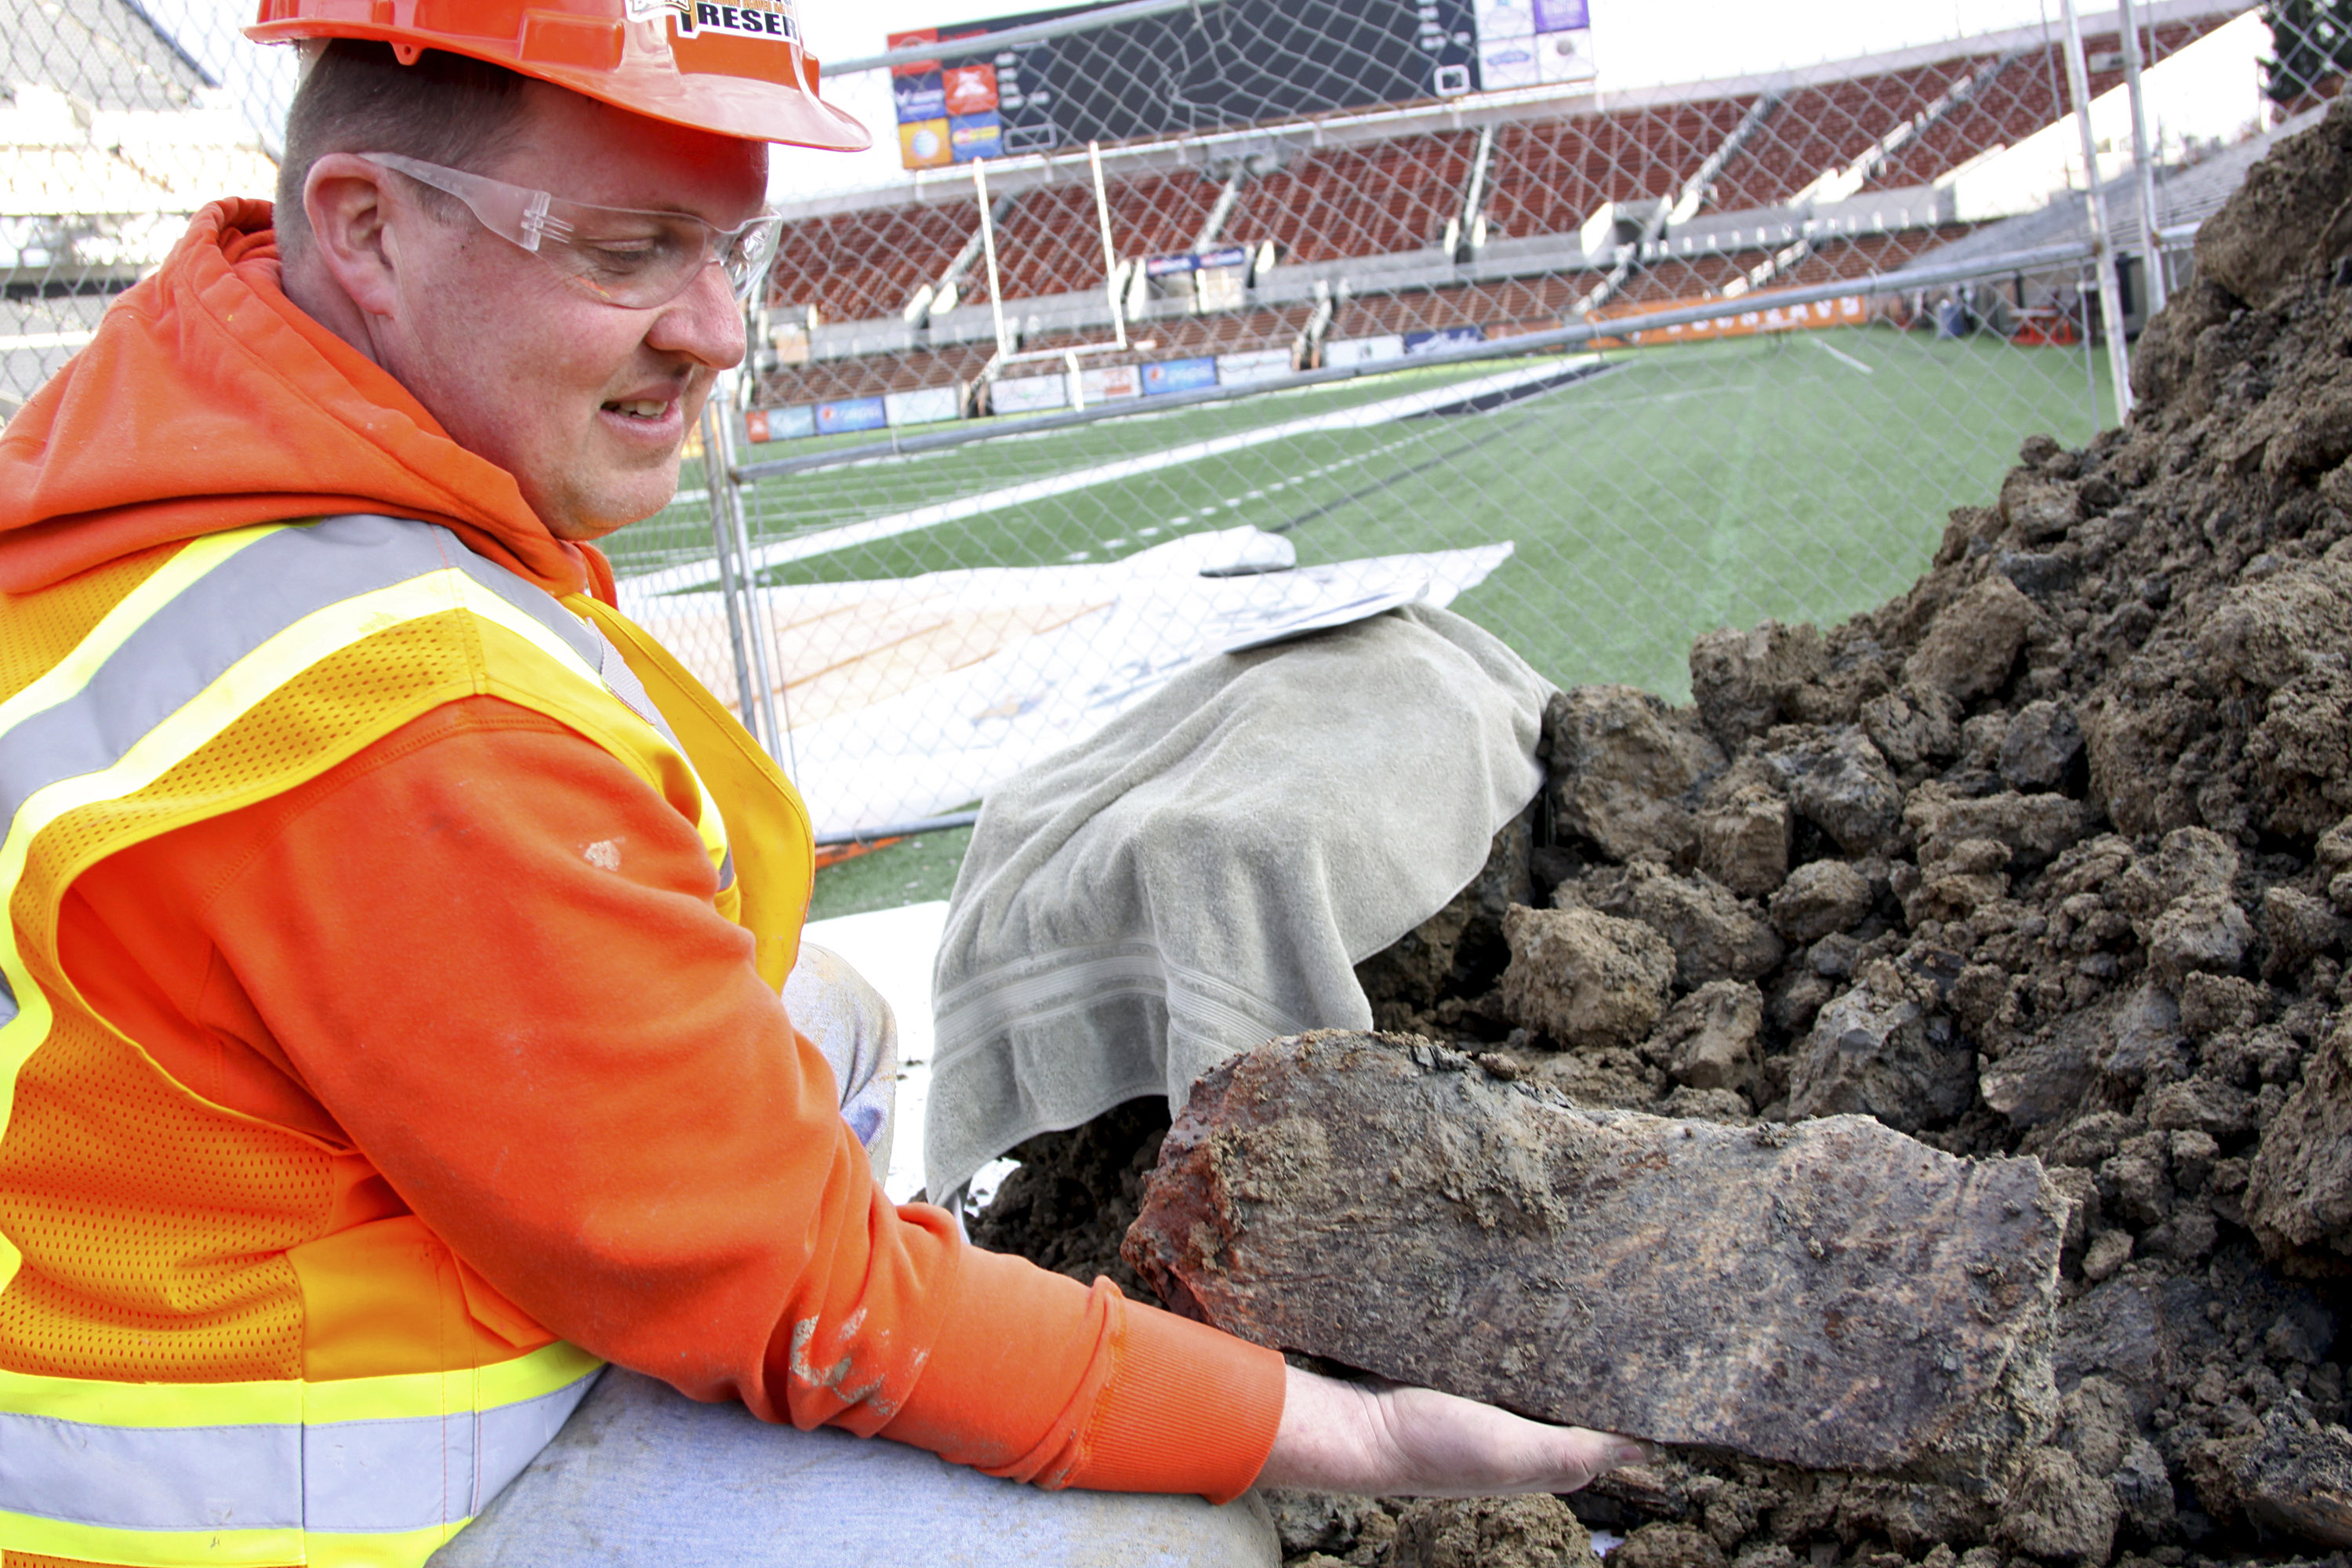 In this Jan. 26, 2016 photo provided by Oregon State University, Woodburn High School science teacher Dave Ellingson holds part of the pelvis of a mammoth found at an OSU construction site by a football field in Corvallis, Ore. Crews working on an expansion around Reser Stadium found a femur from one of the ancient elephants and bones from a bison and camel, all dating back 10,000 years. A spokesman says the OSU archaeologist believes the 10-foot pit where the remains were found could have been a pond or watering hole. (Theresa Hogue/Oregon State University via AP) (Theresa Hogue—AP)